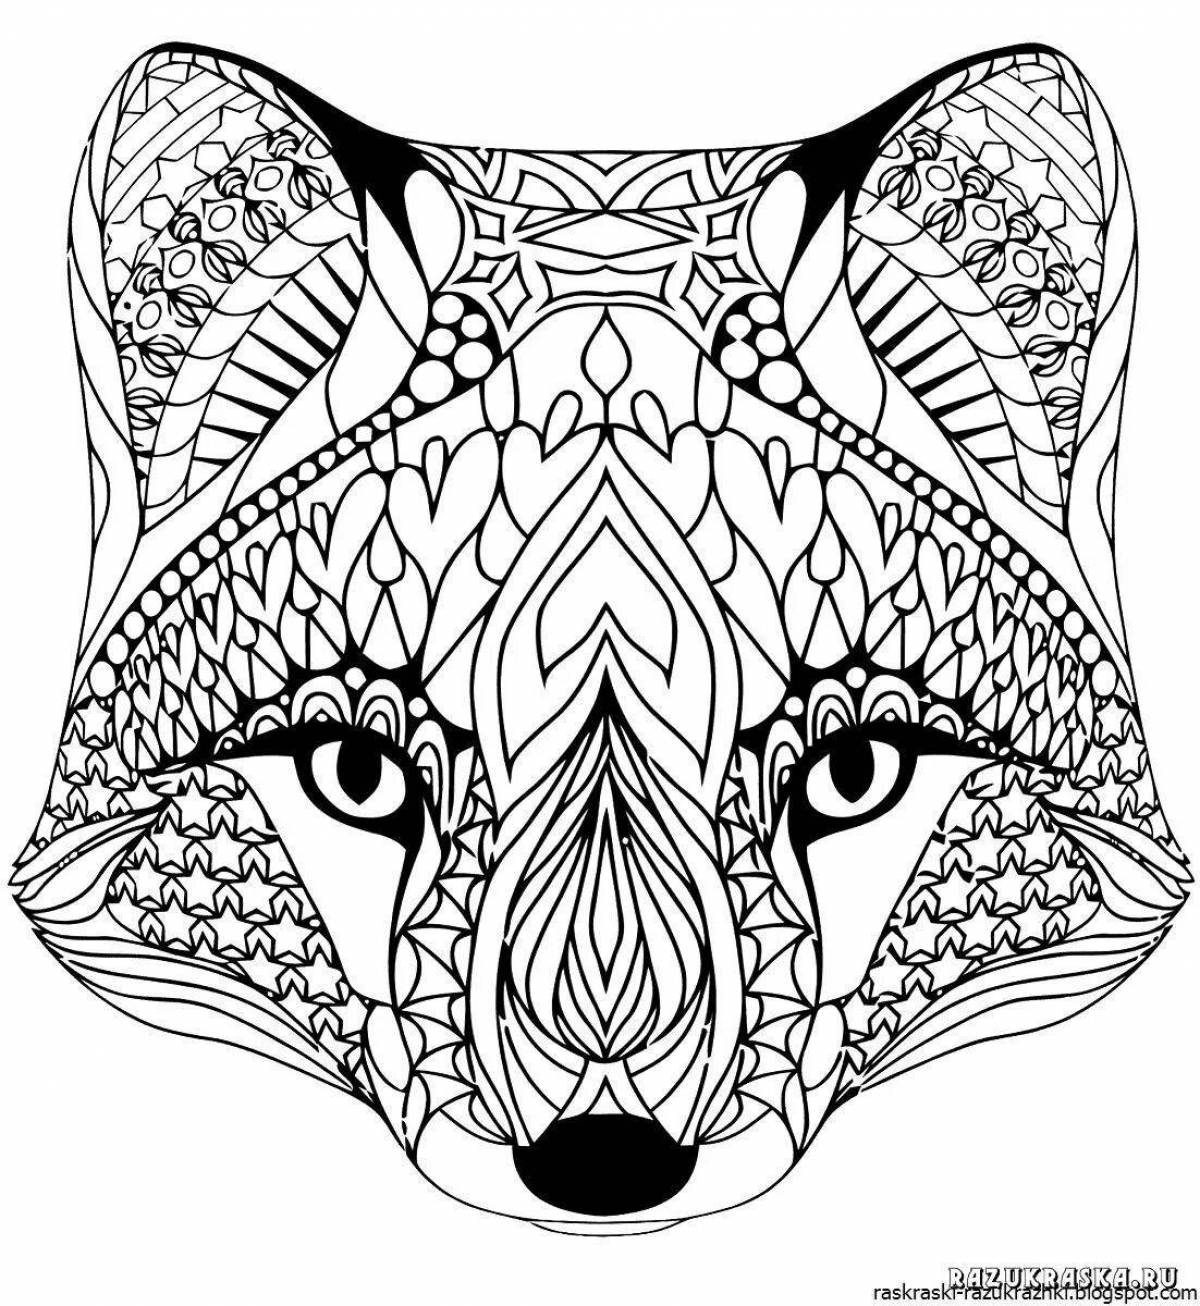 Radiant 15 years antistress coloring page